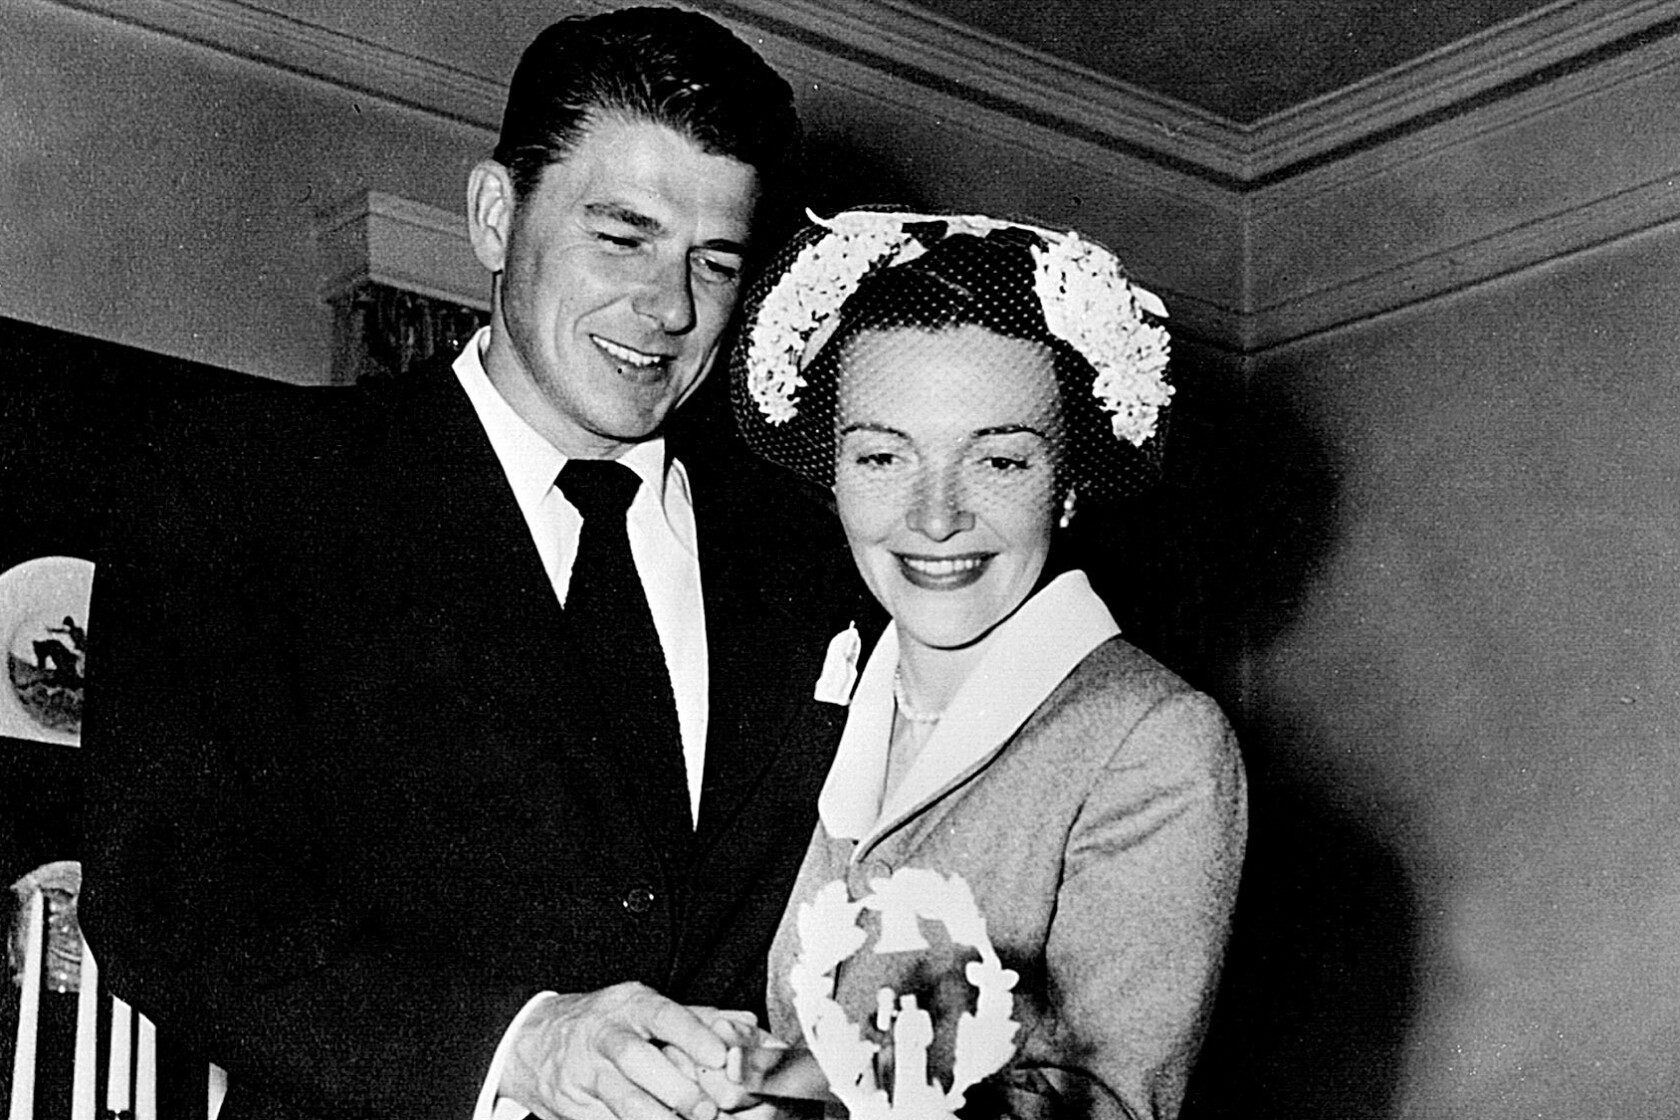 Image result for president and mrs reagan wedding images